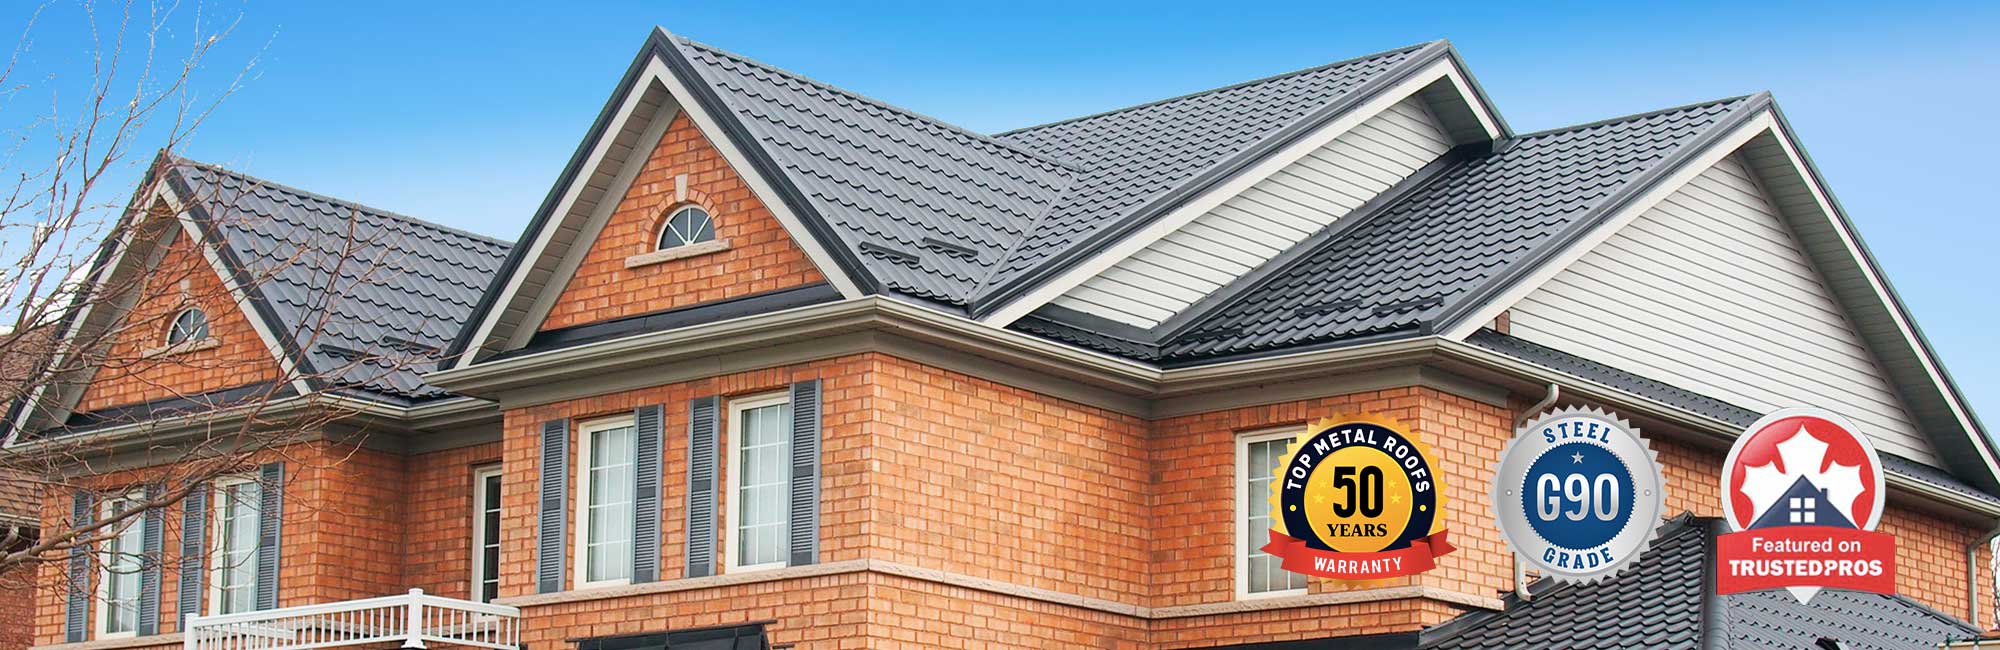 Metal Roofing Tile Service in Toronto and GTA